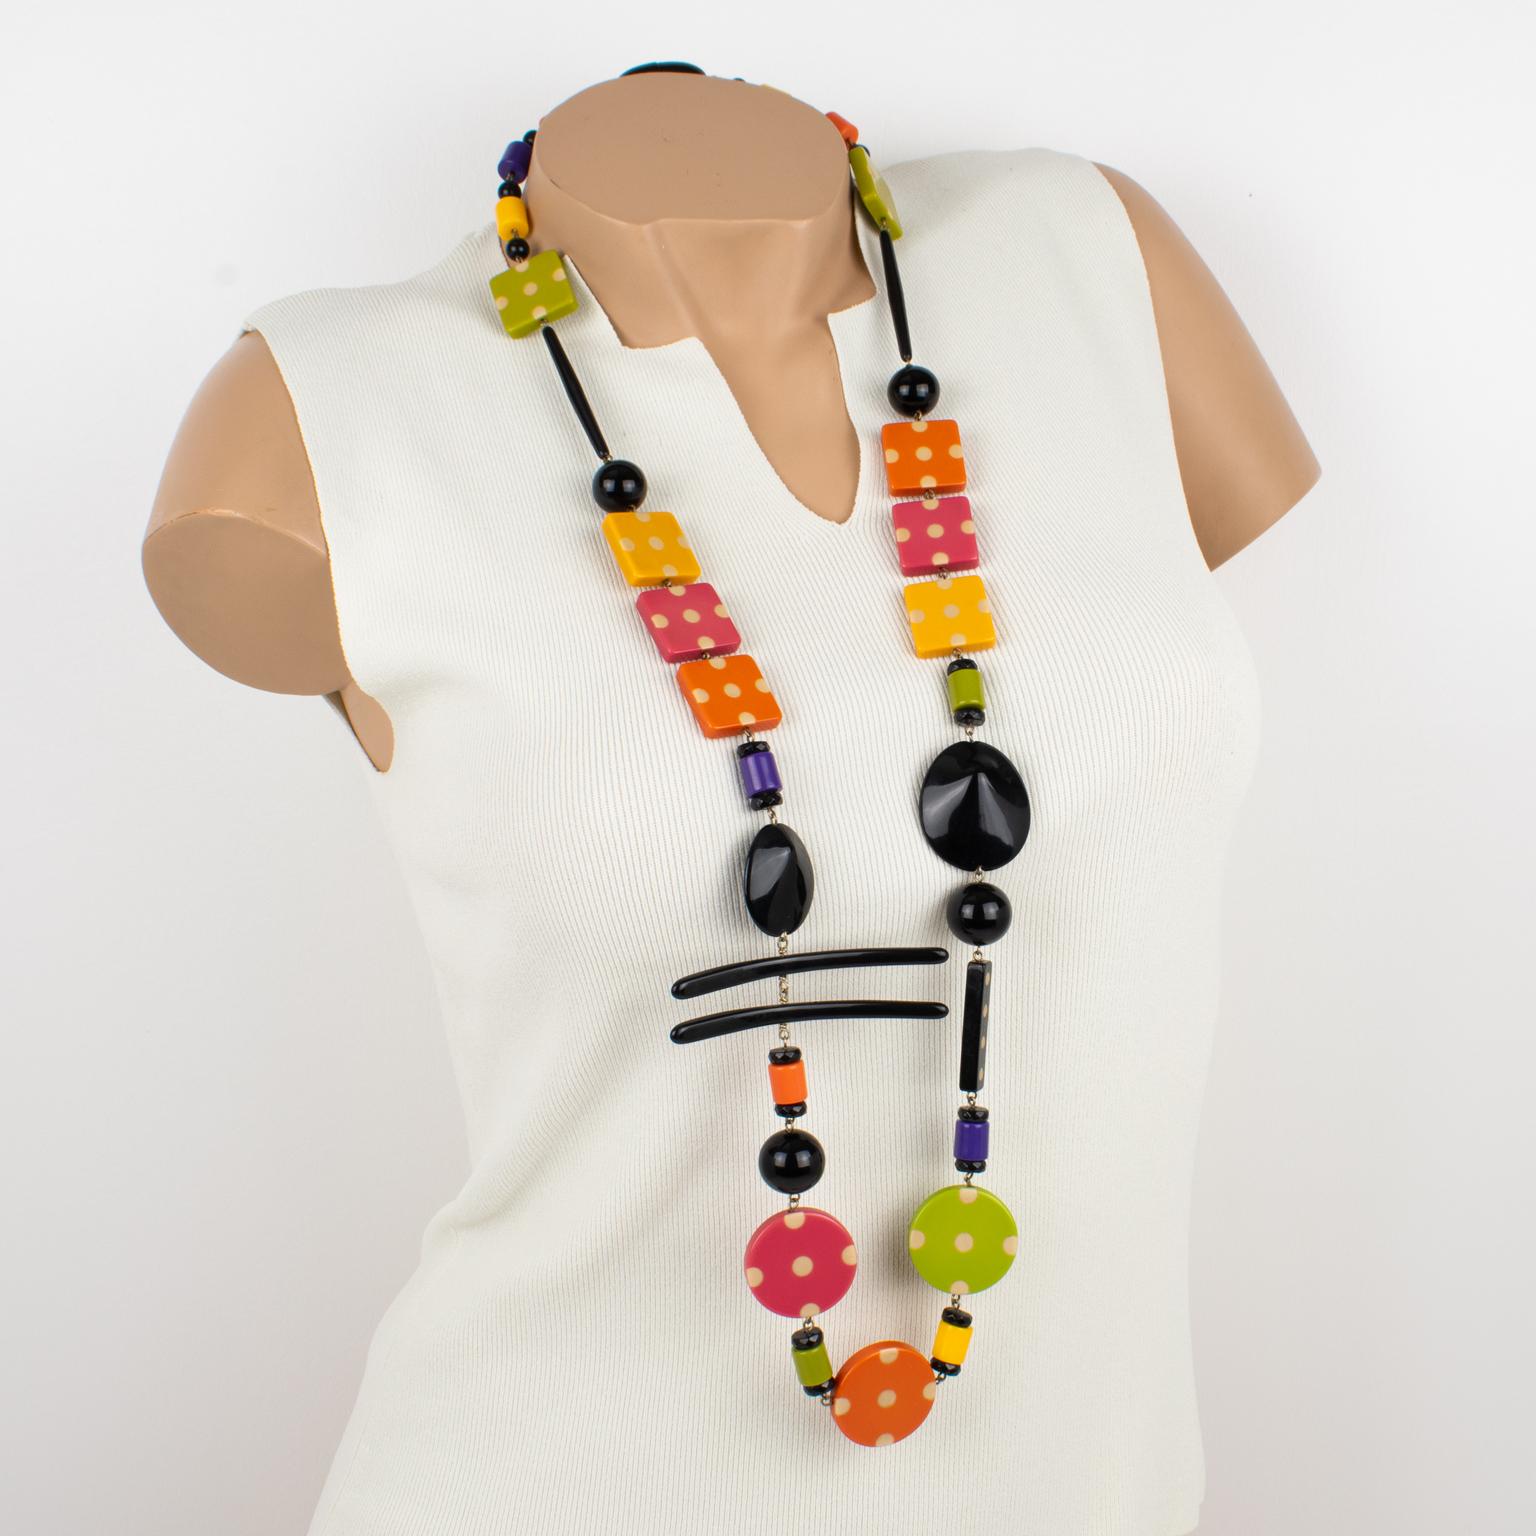 This gorgeous Angela Caputi, made-in-Italy resin and Lucite extra-long necklace has a playful design. The piece boasts geometric elements in a multicolor pattern with textures and different bead shapes. The asymmetrically constructed design features